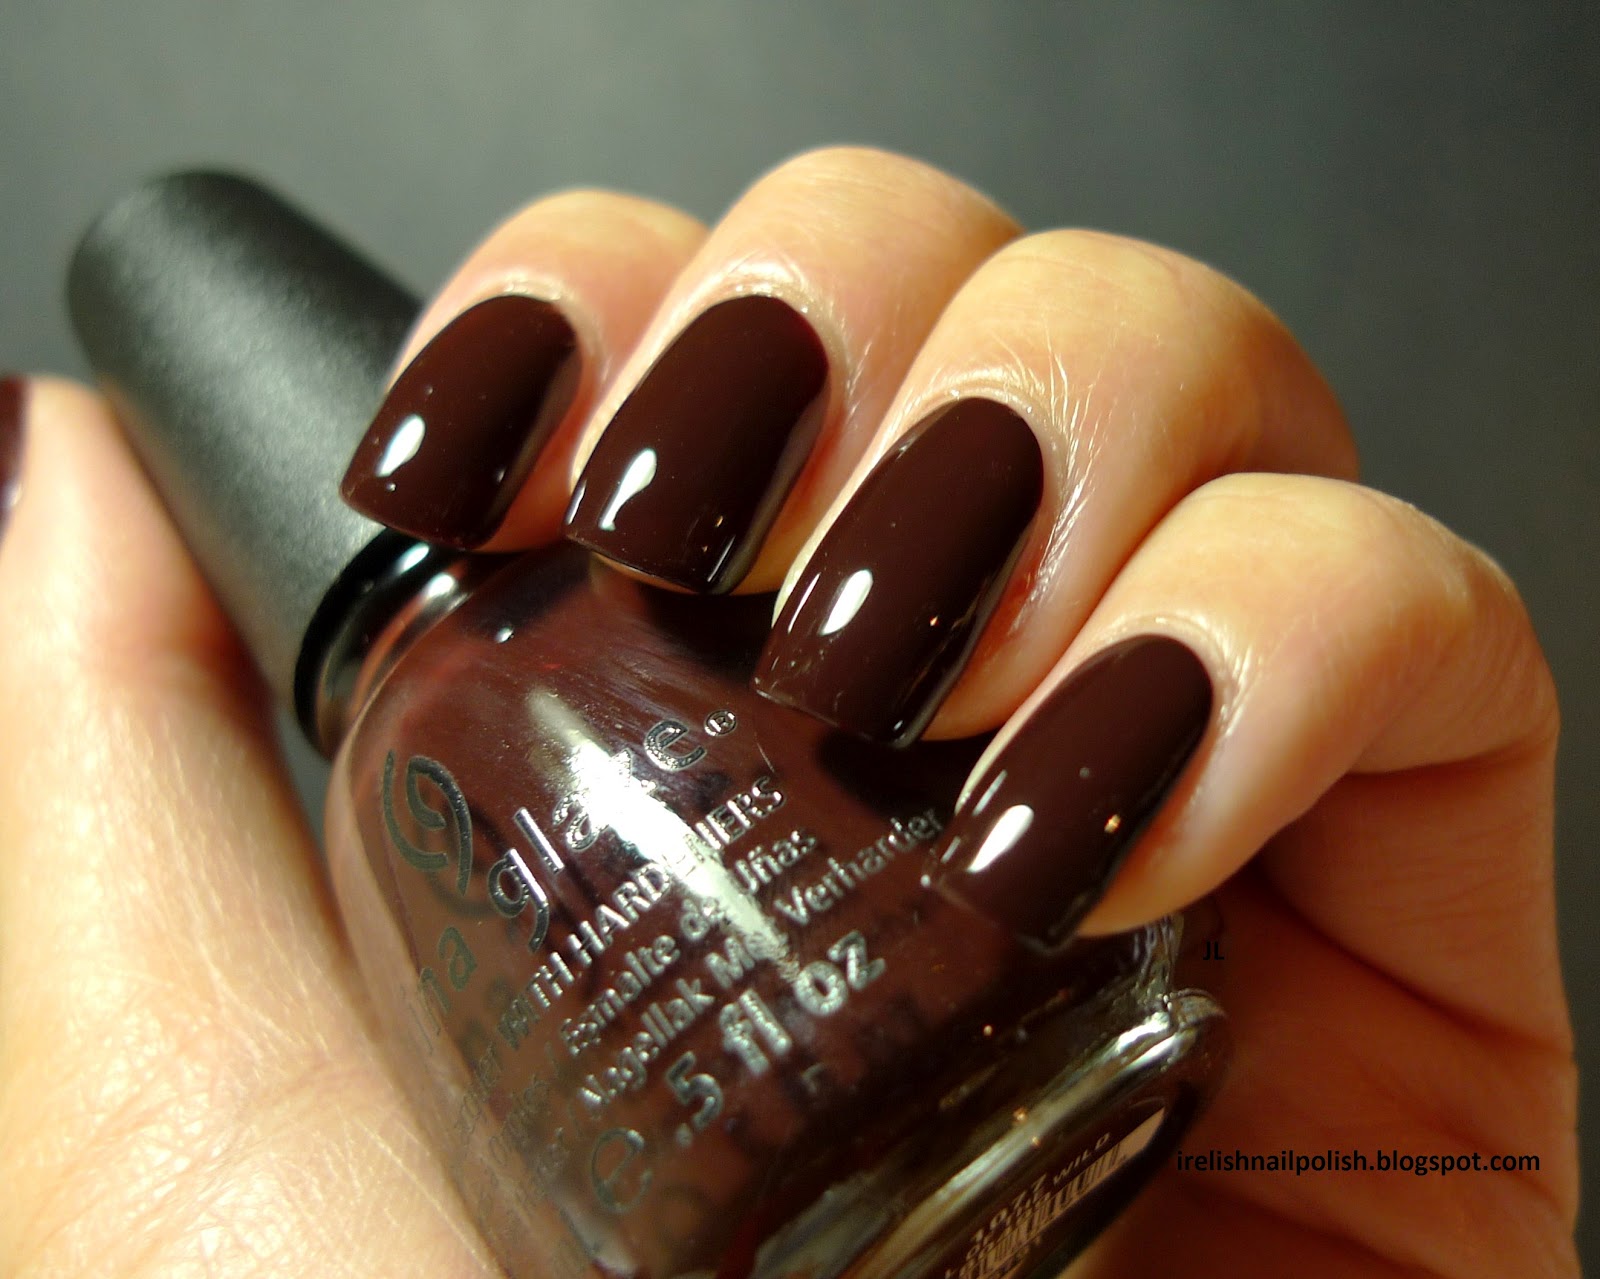 Chocolate brown - wide 2